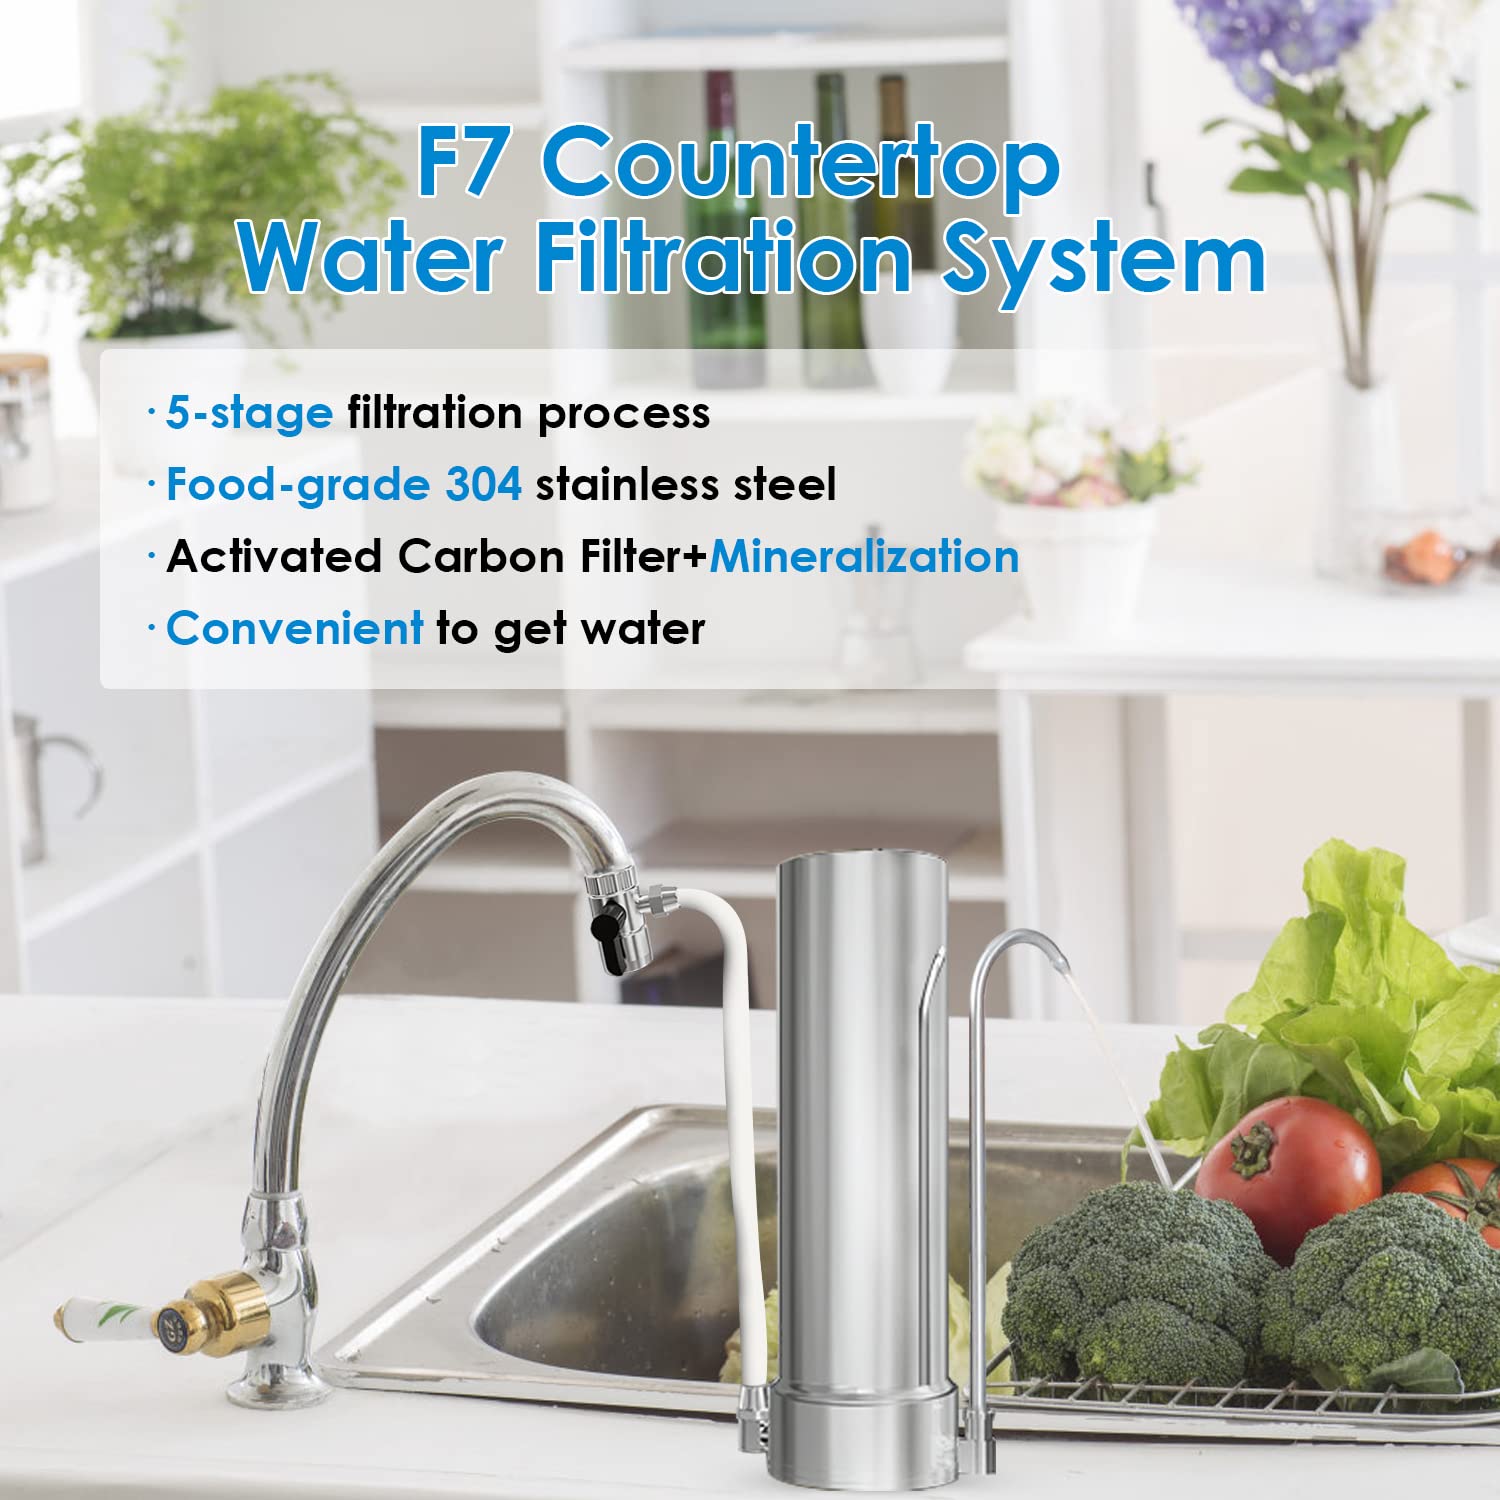 Vortopt Countertop Water Filter System -F7